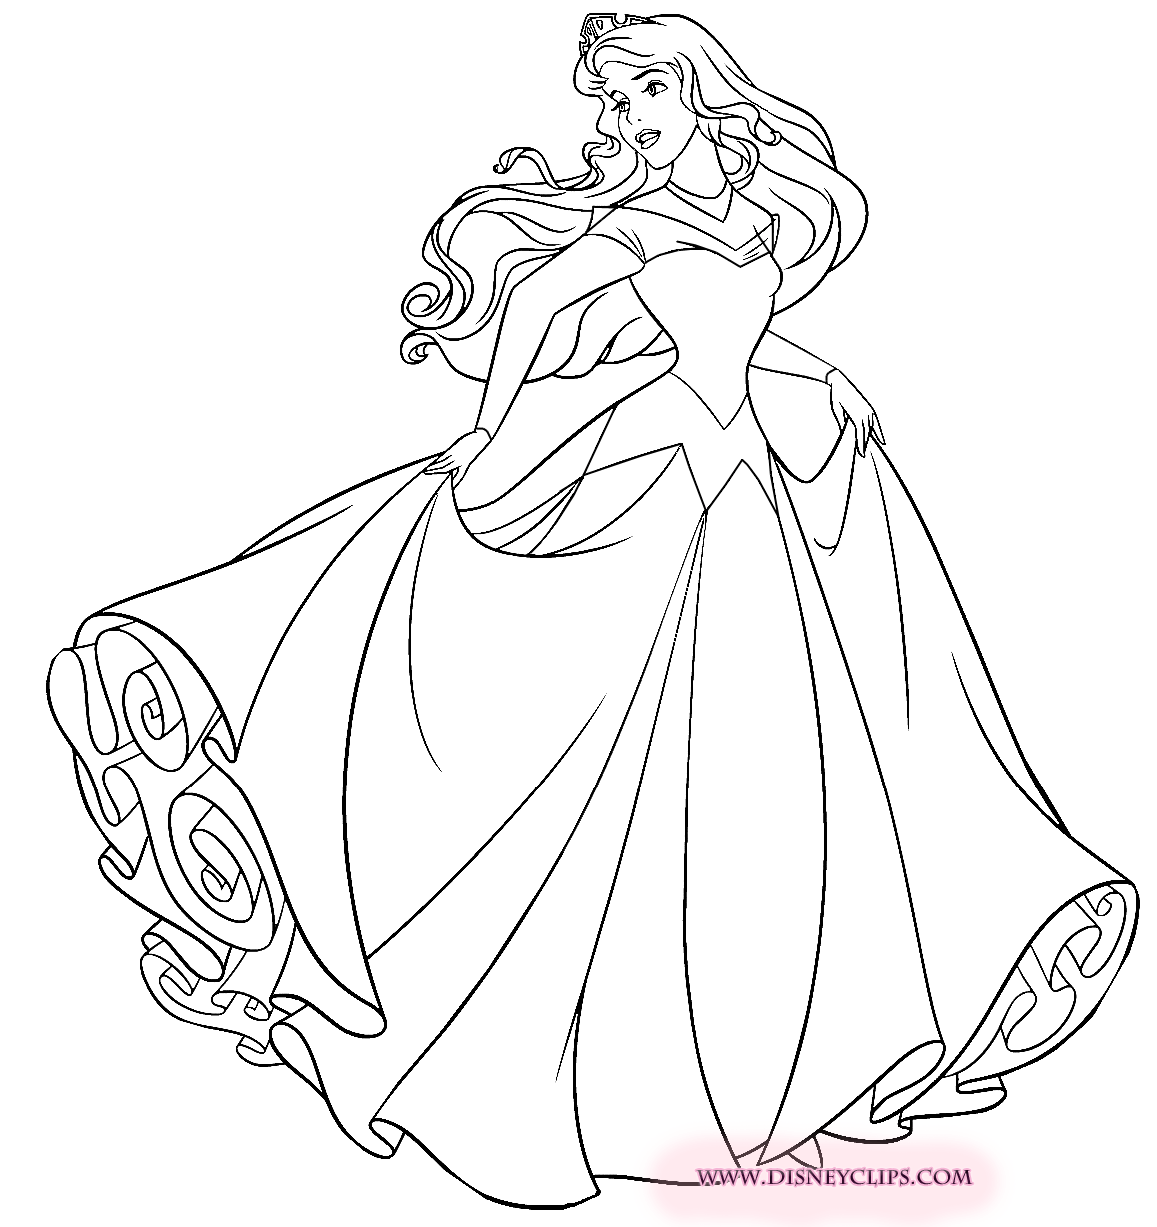 Princess Aurora Coloring Pages   High Quality Coloring Pages ...